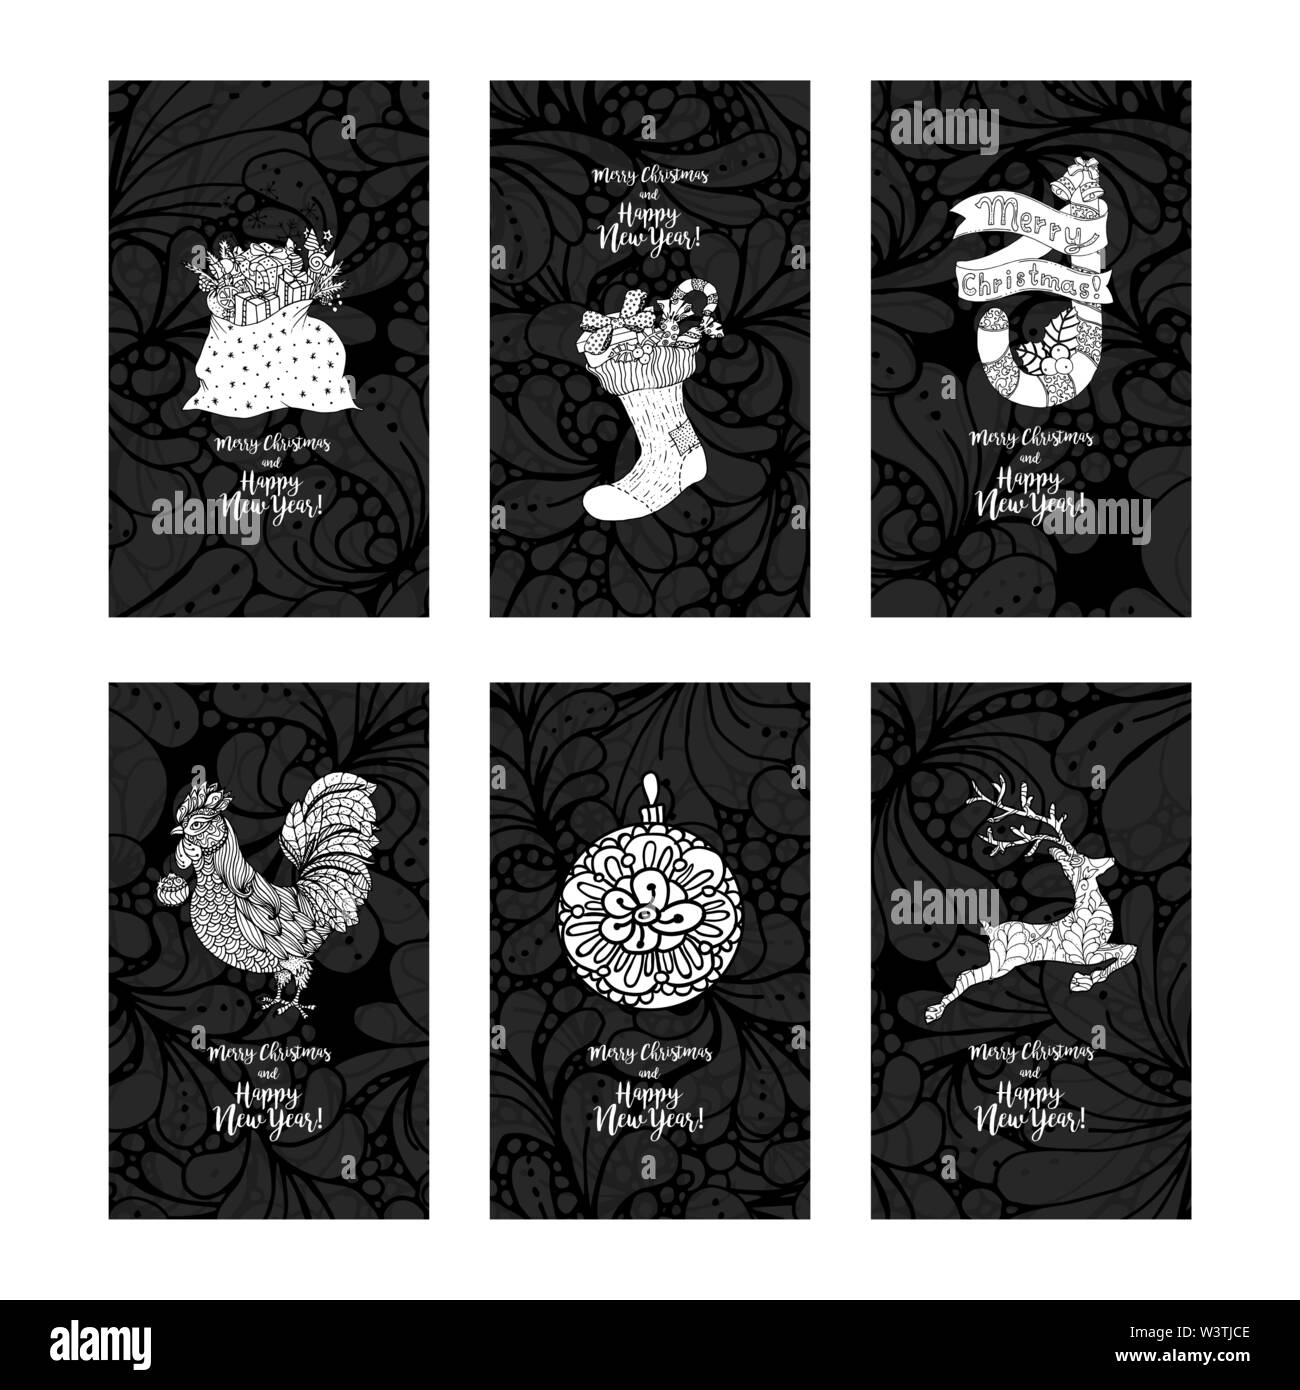 Greeting card set for New Year and Christmas. Hand drawn doodles elements. Vertical vector Stock Vector